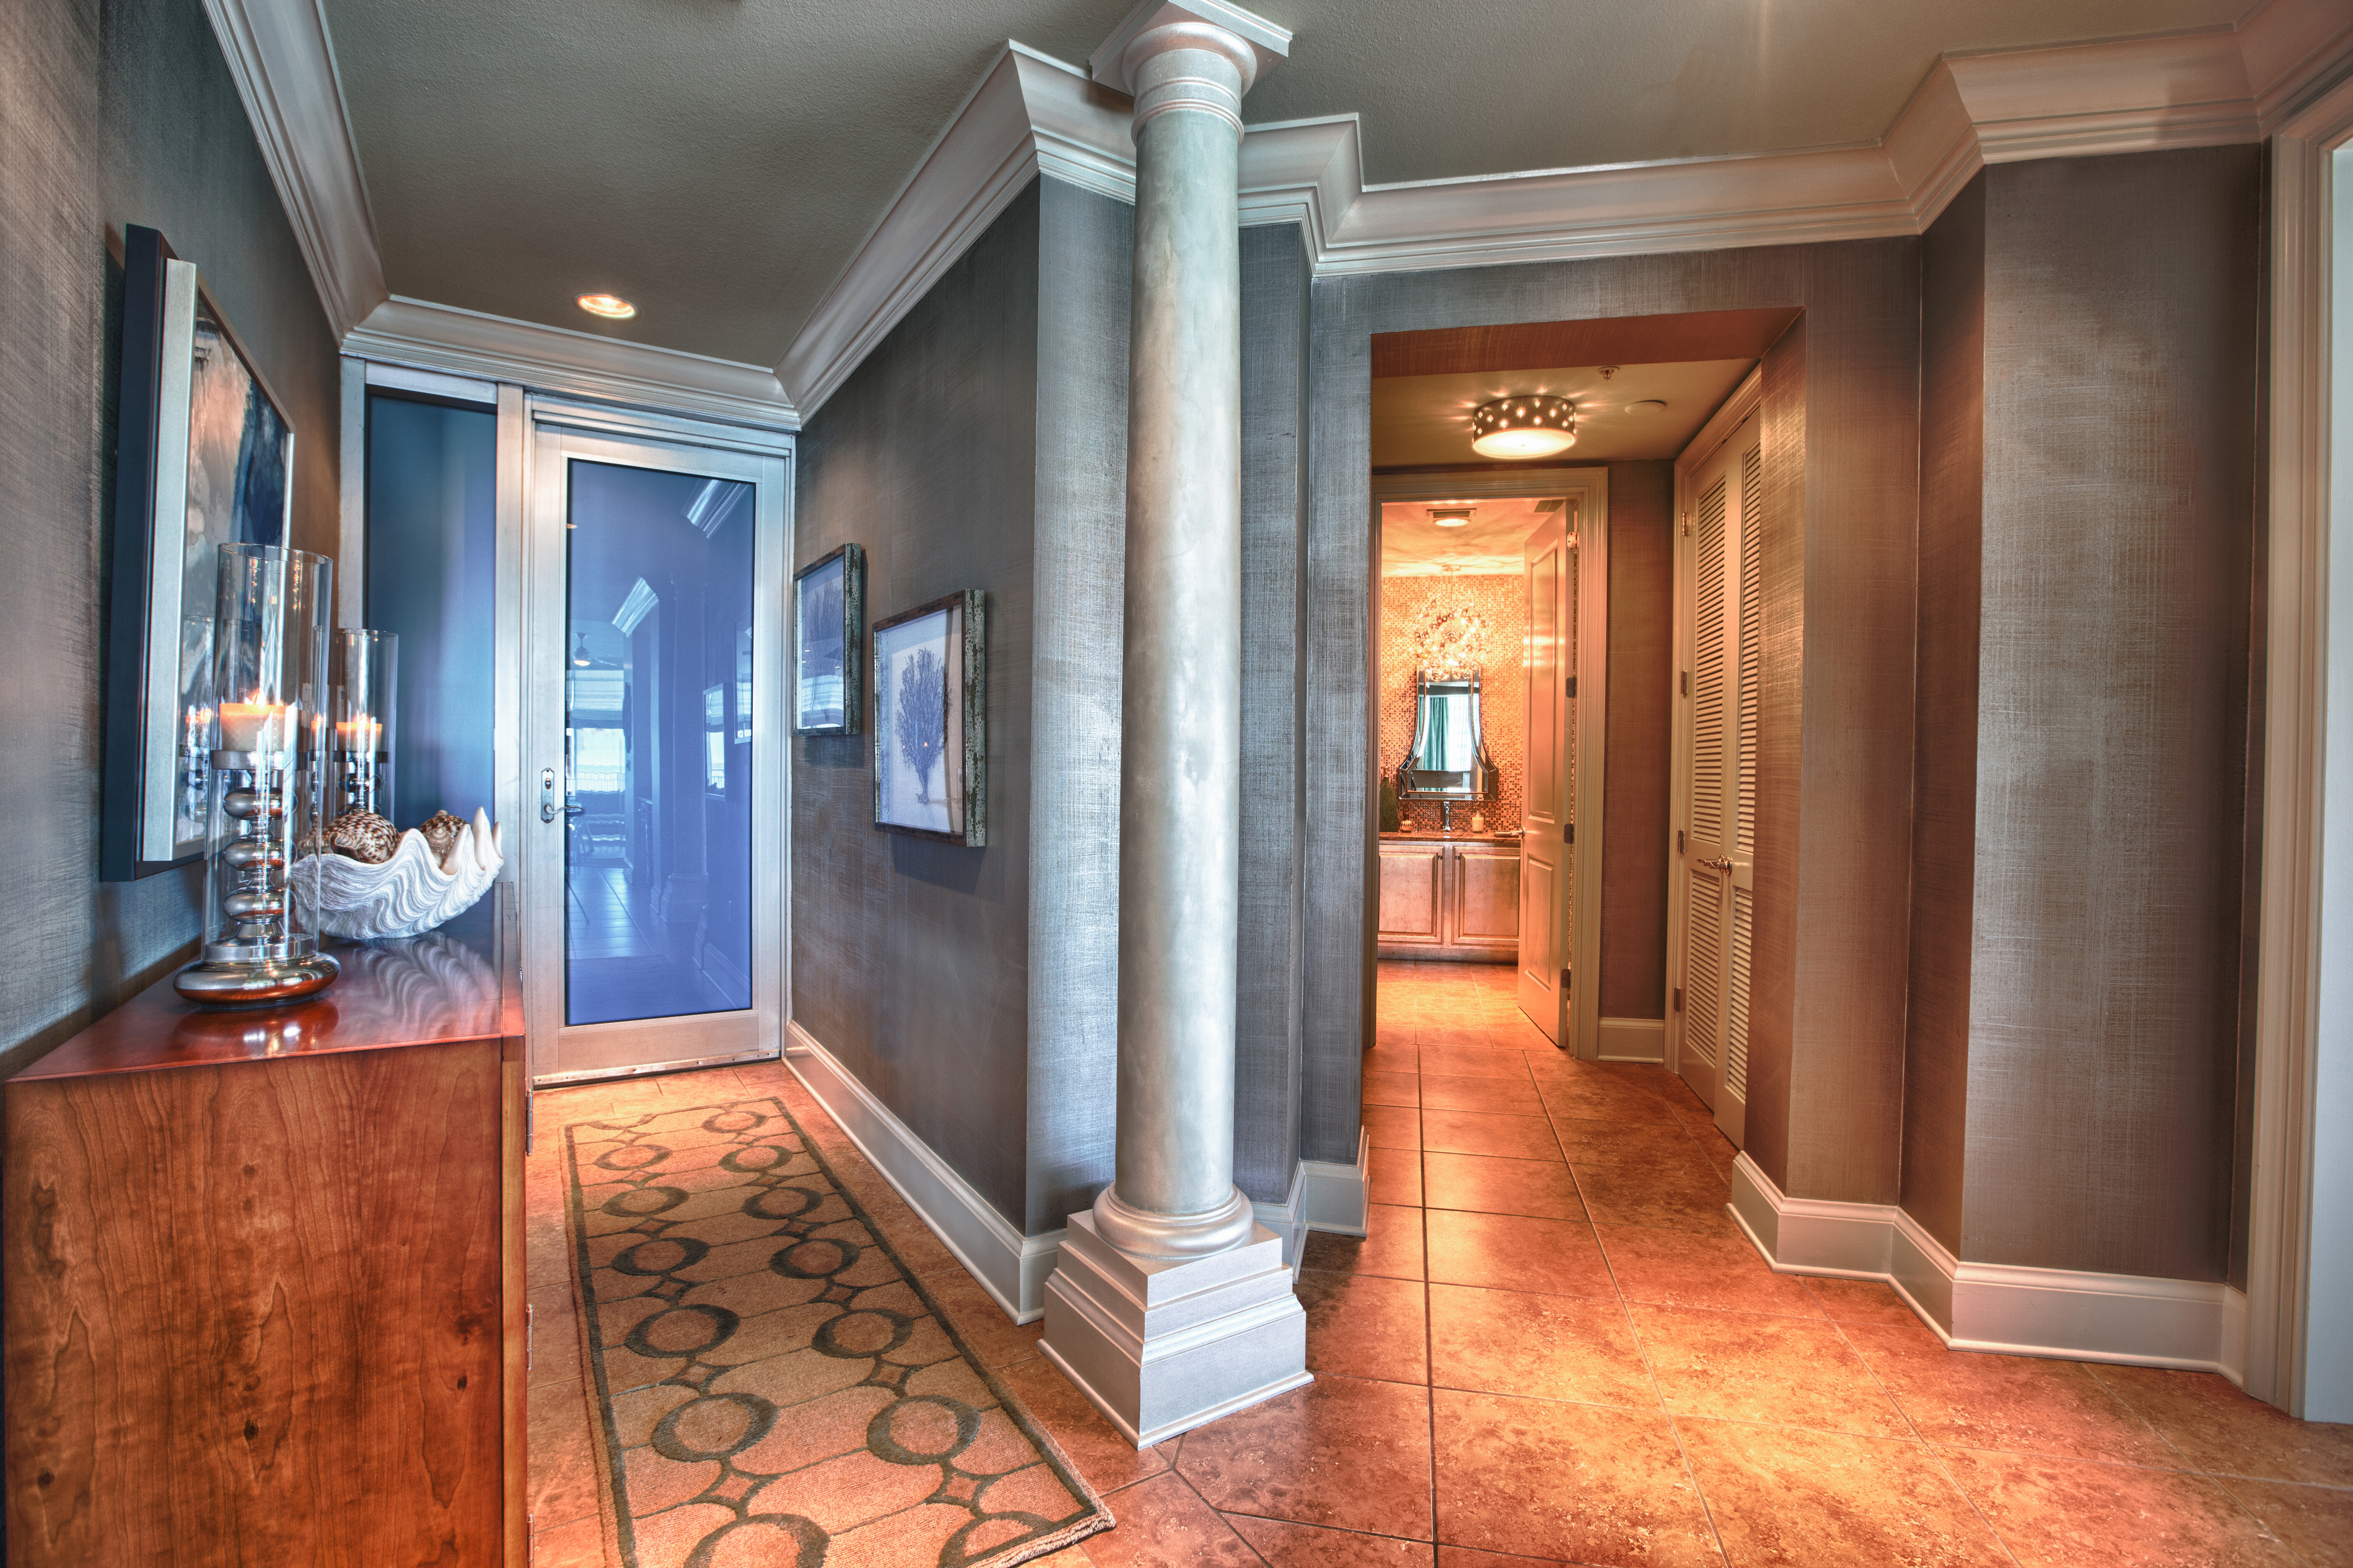 This shot allows you to see the Entry and Powder Bath entrance.  The walls here are a silver linen textured faux finish, and the columns were given a pearlescent finish.  